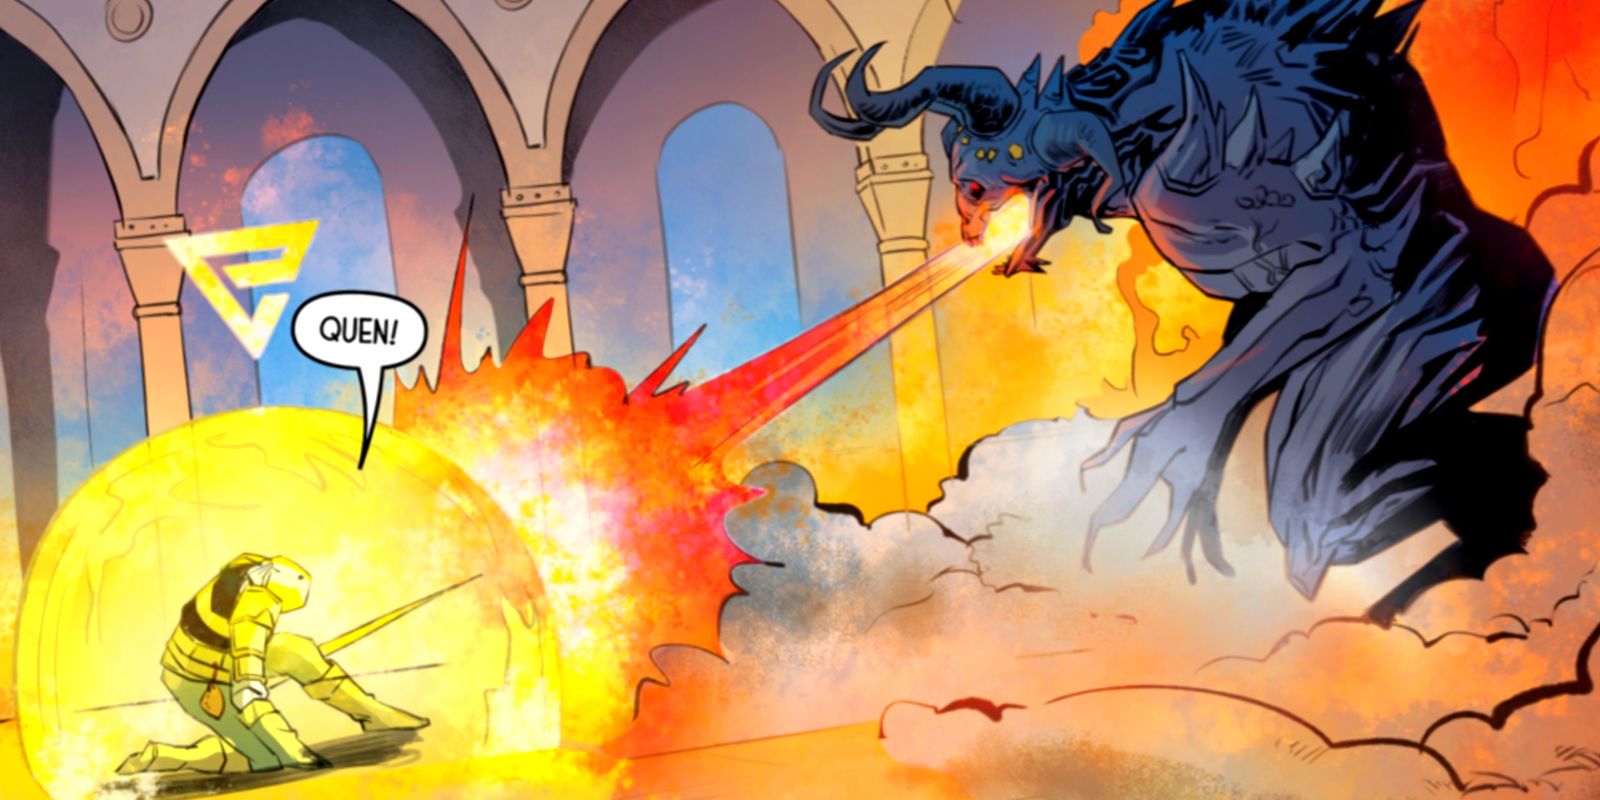 a witcher casting the quen sign when attacked by the fire breath of a monster in the witcher graphic novel